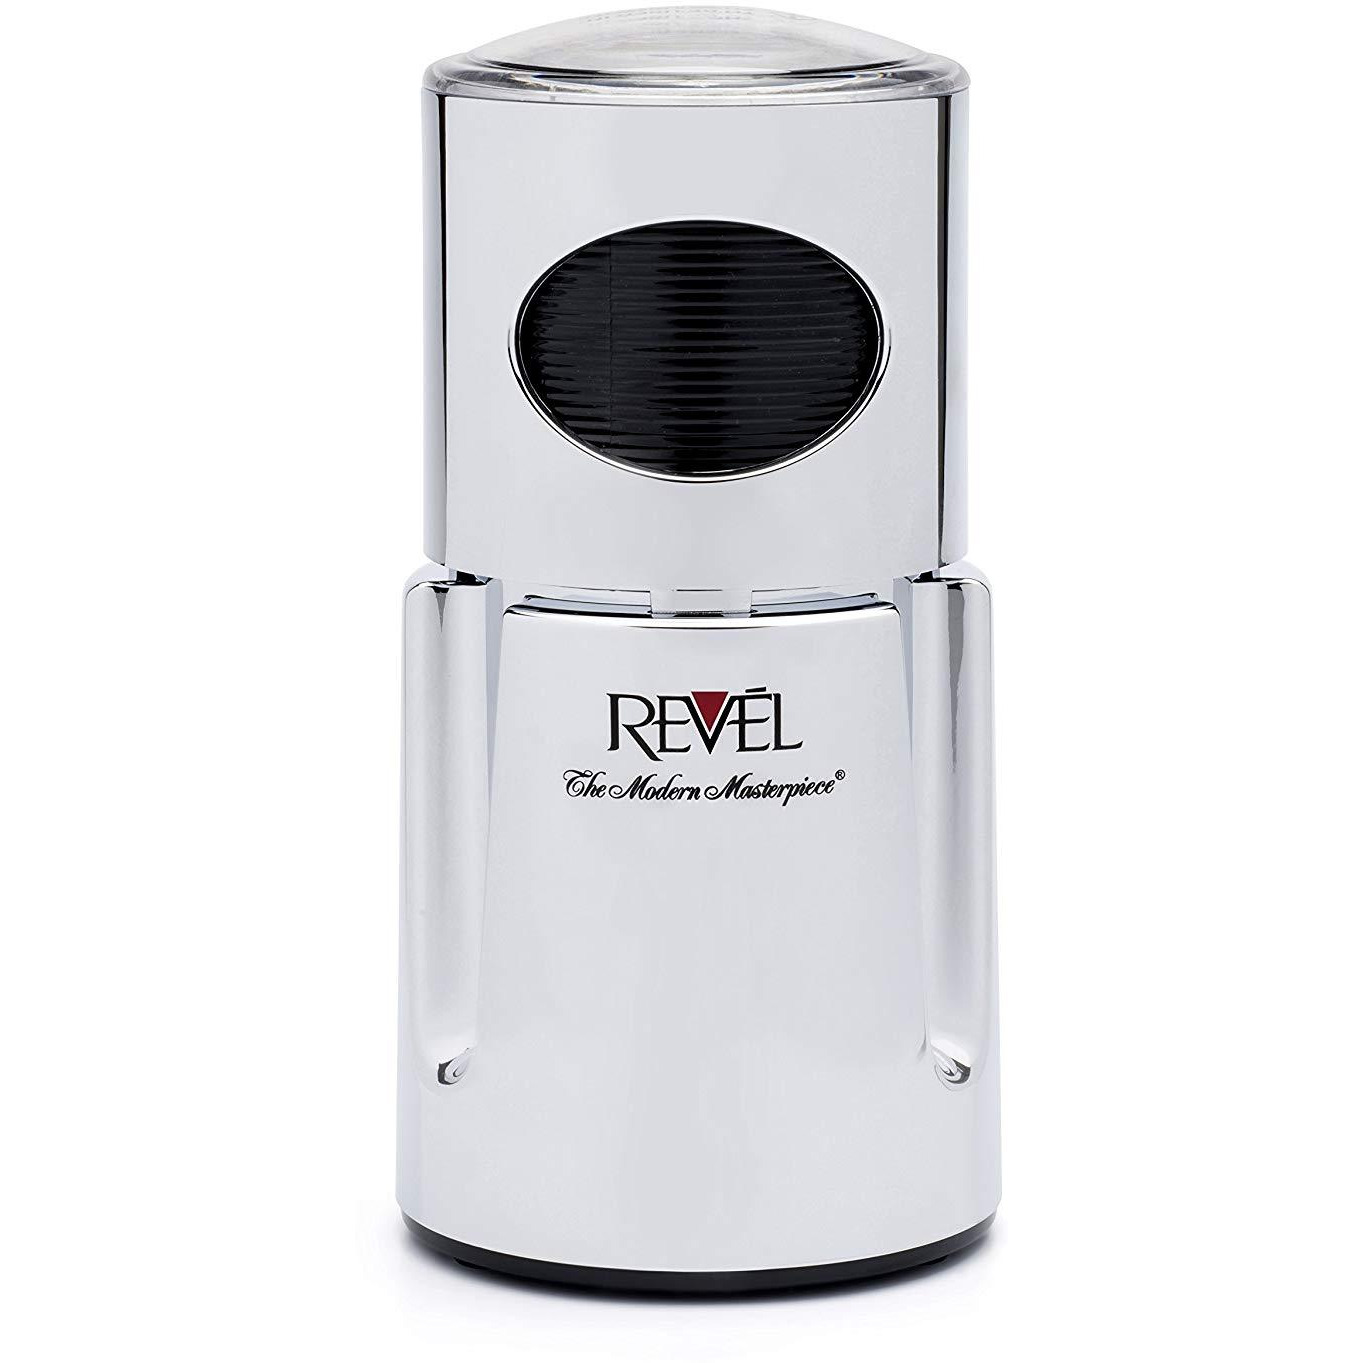 Revel CCM104CH Chrome Wet and Dry Coffee Spice Grinder, 220 Volts (Not for USA - European Cord)